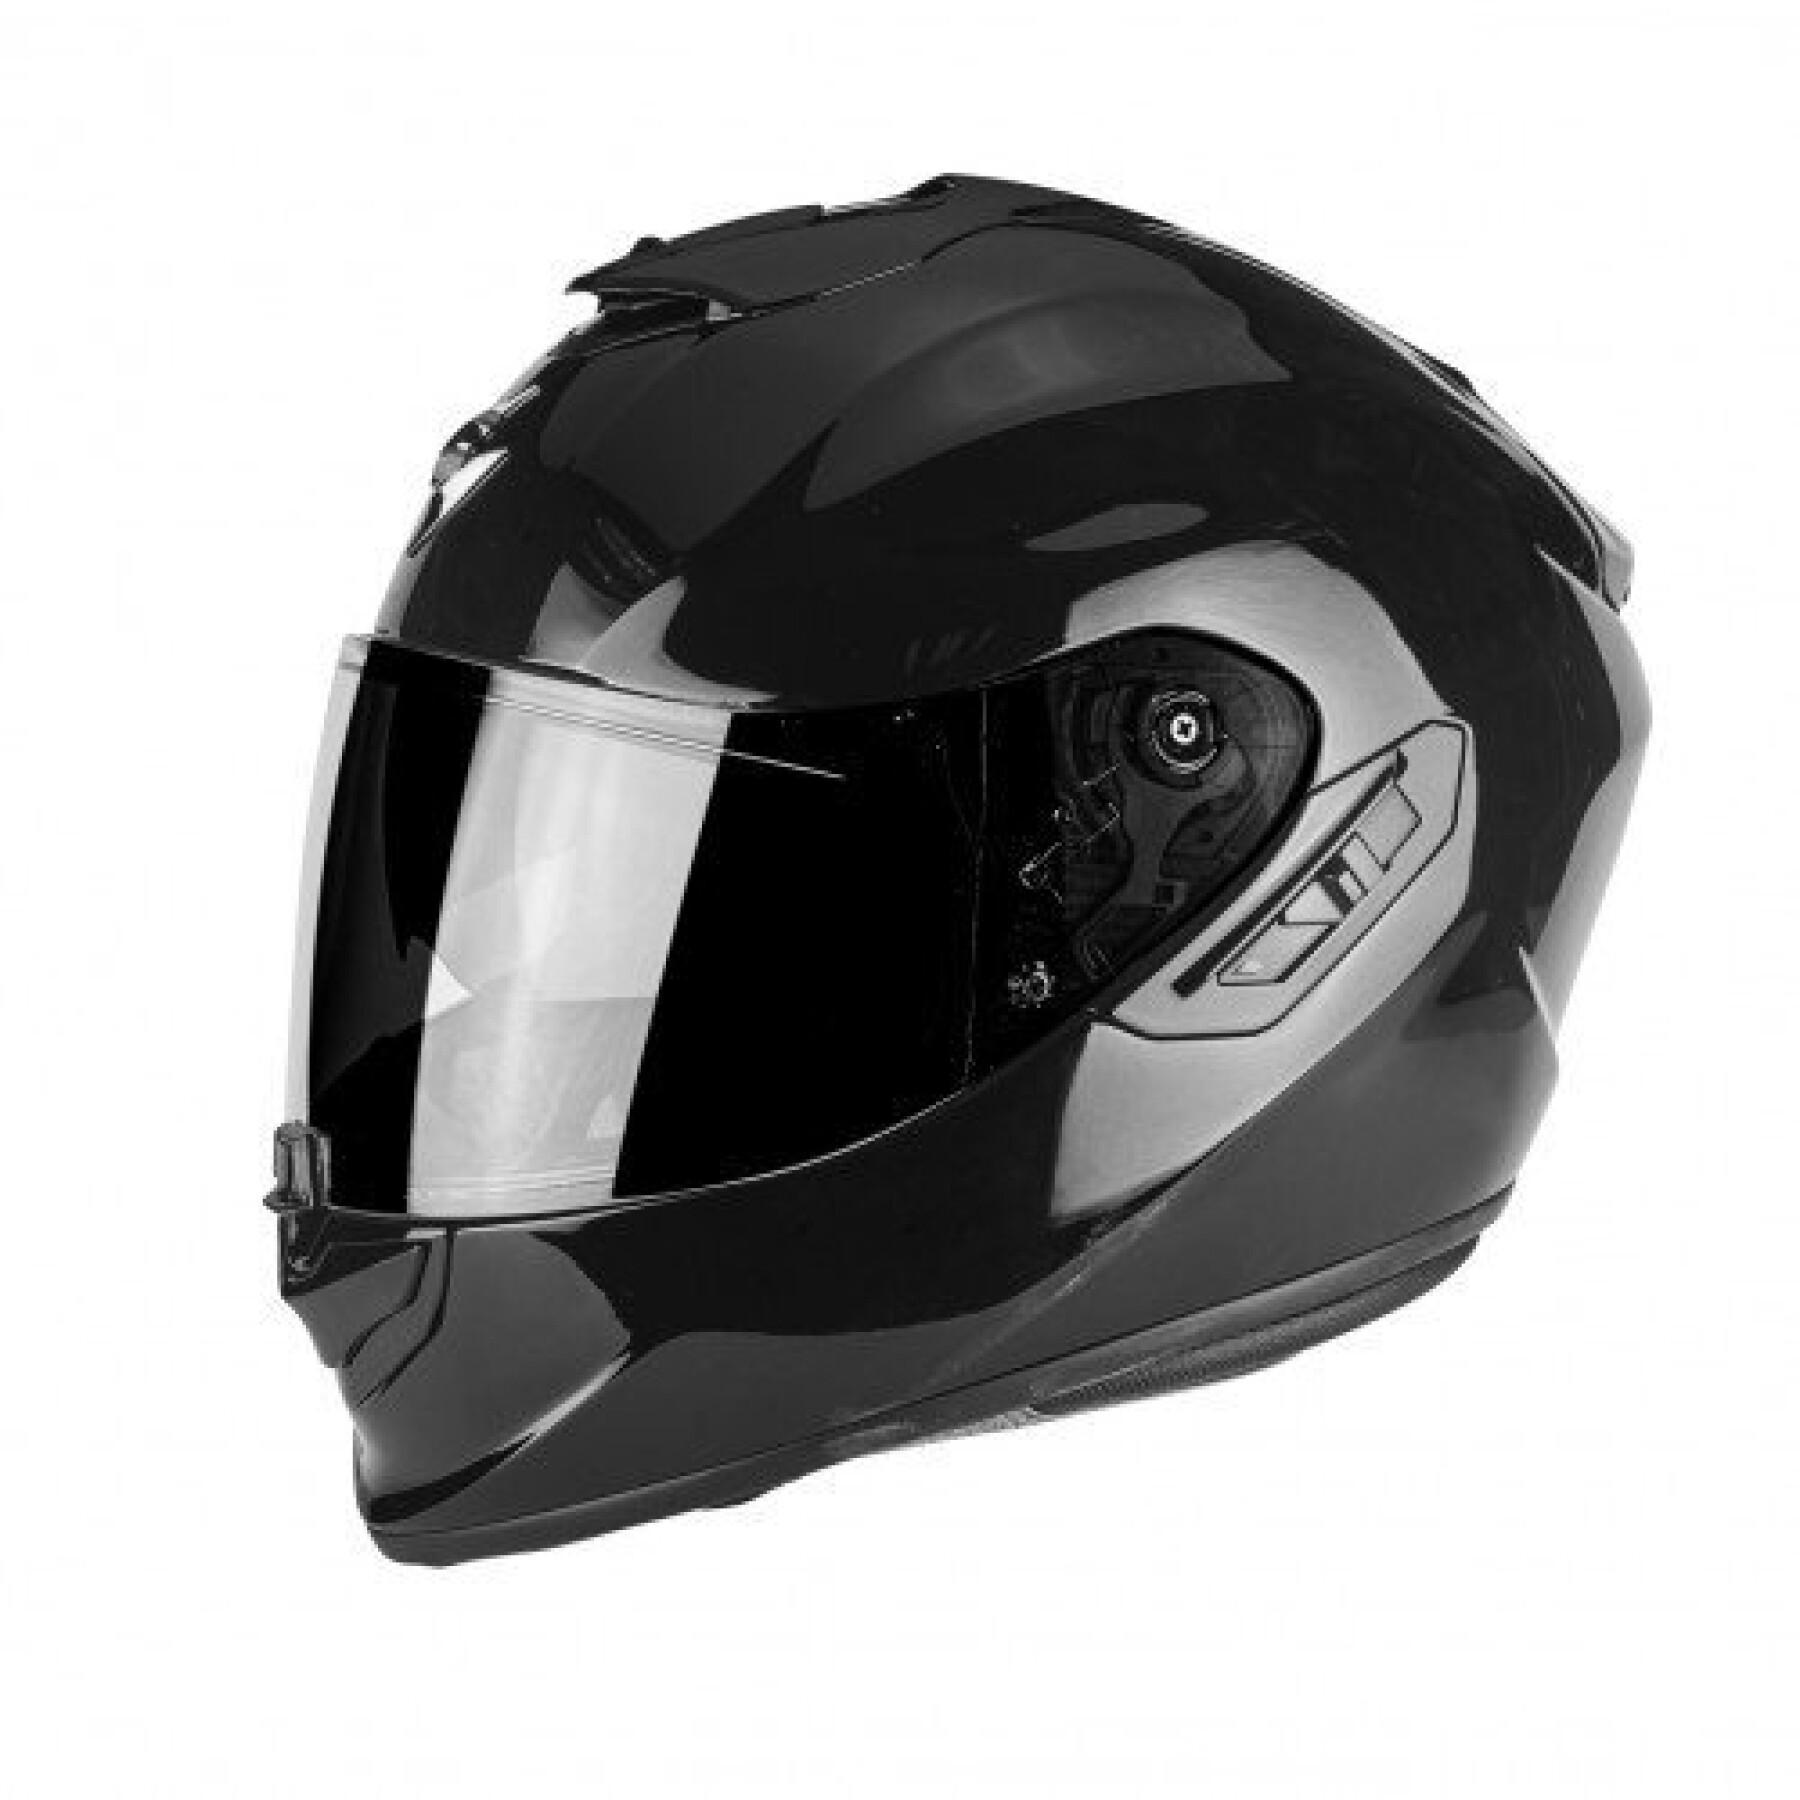 Capacete facial completo Scorpion Exo-1400 Air SOLID